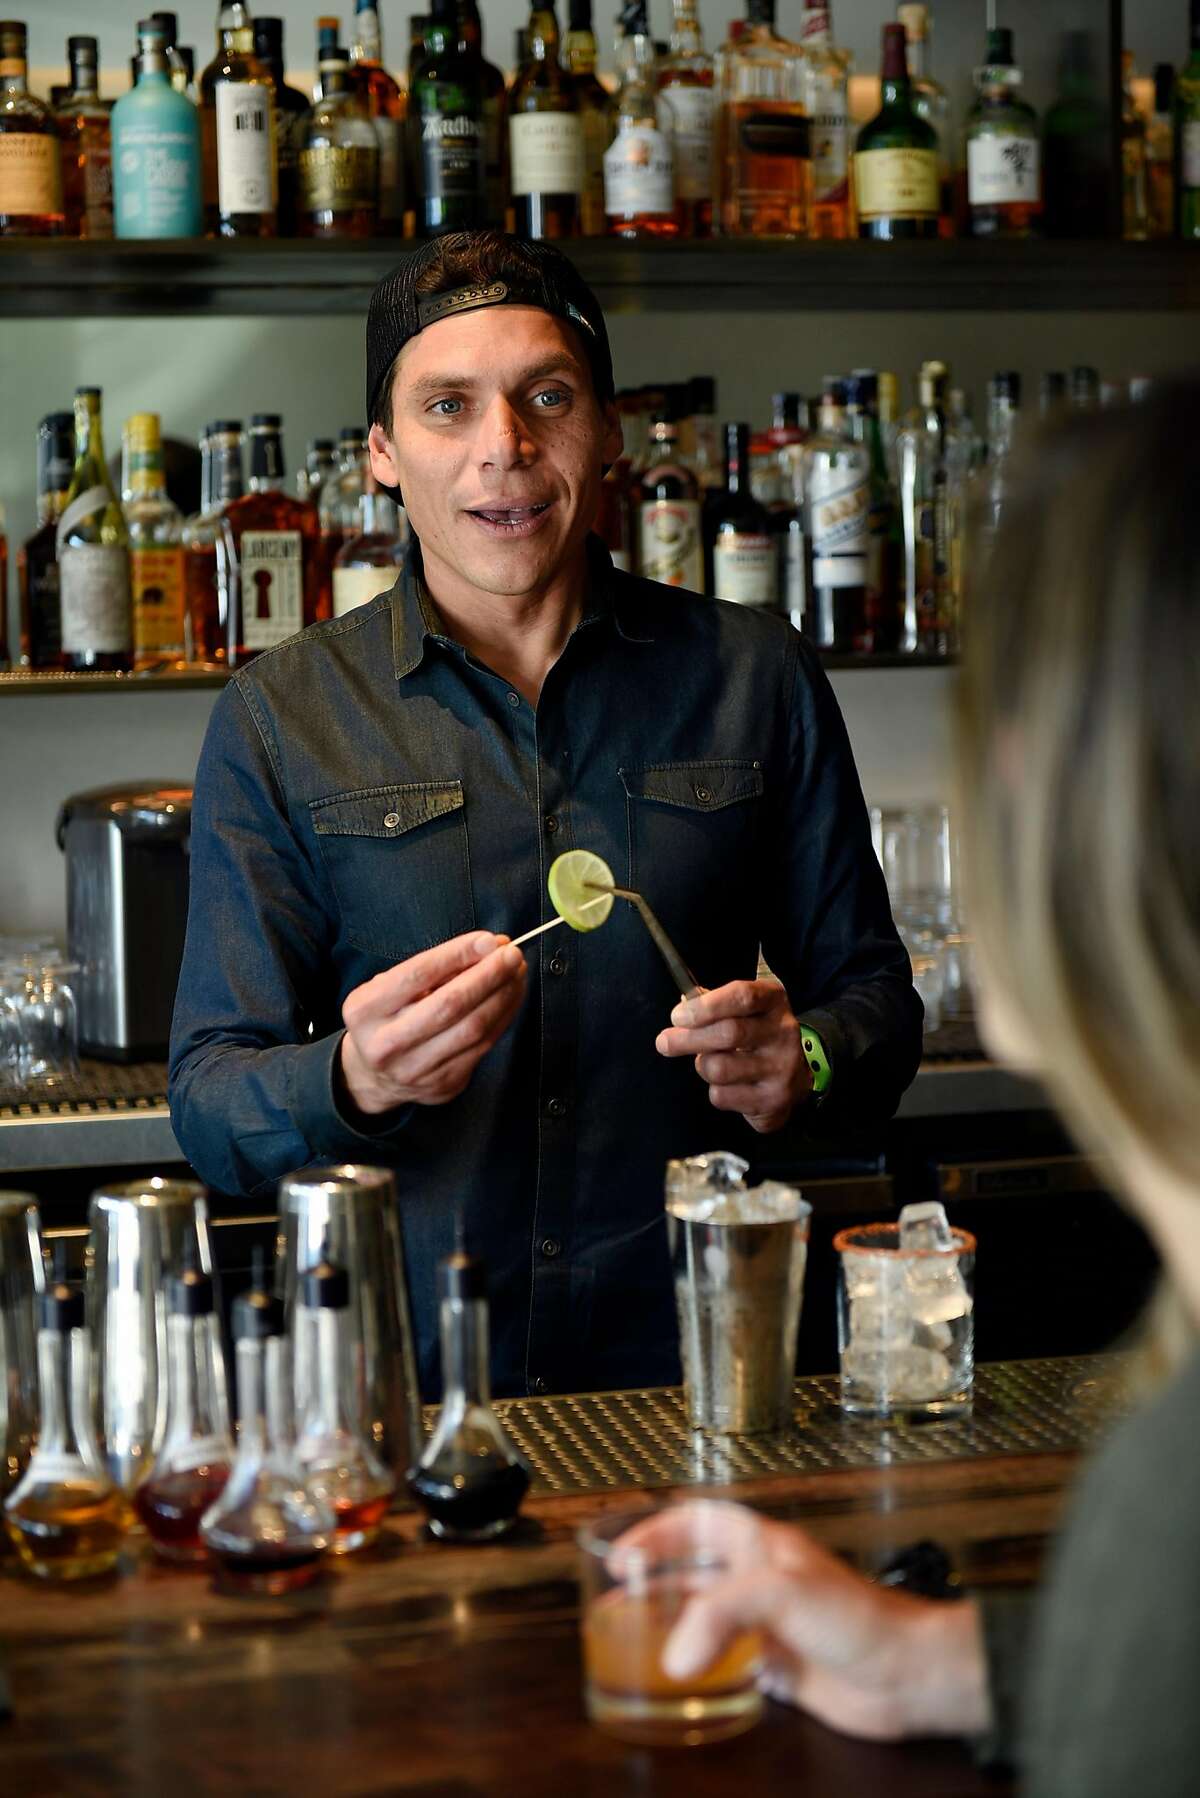 Head bartender Carlos Yturria talks with a customer while making a drink at the White Cap cocktail bar in San Francisco, Calif., on Saturday January 6, 2018.